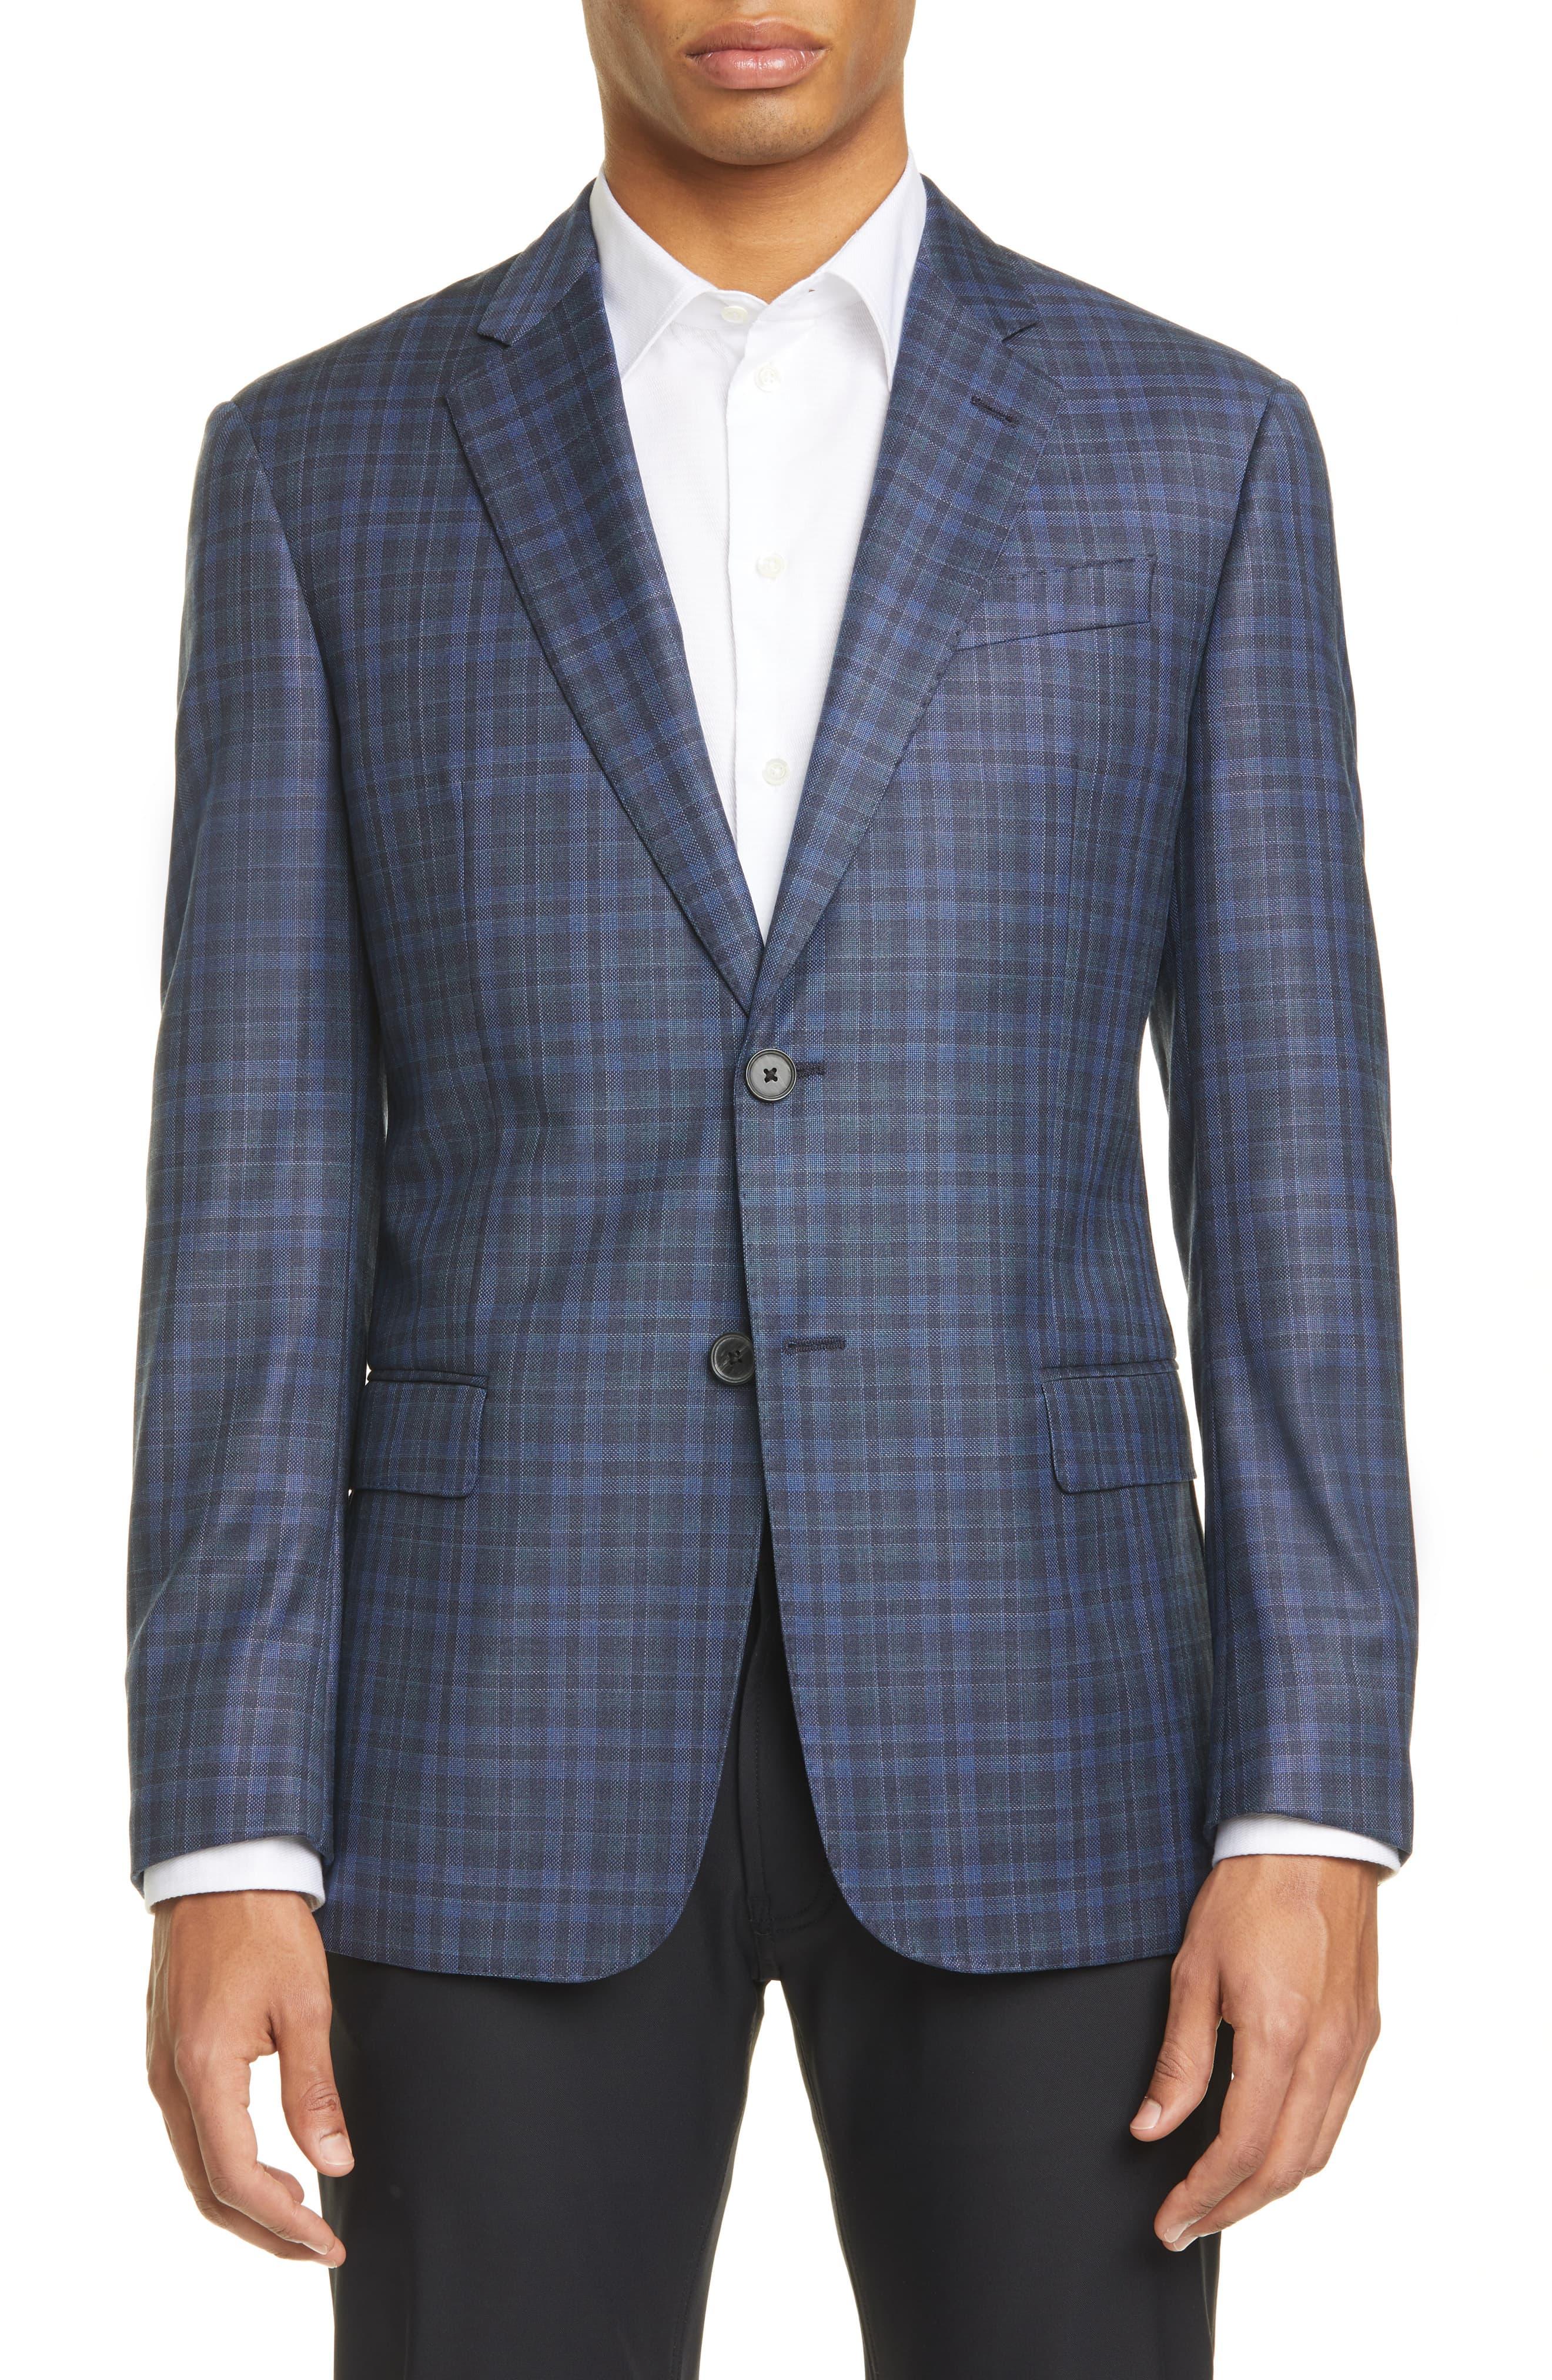 Emporio Armani G Line Trim Fit Check Wool Sport Coat in Blue for Men - Lyst